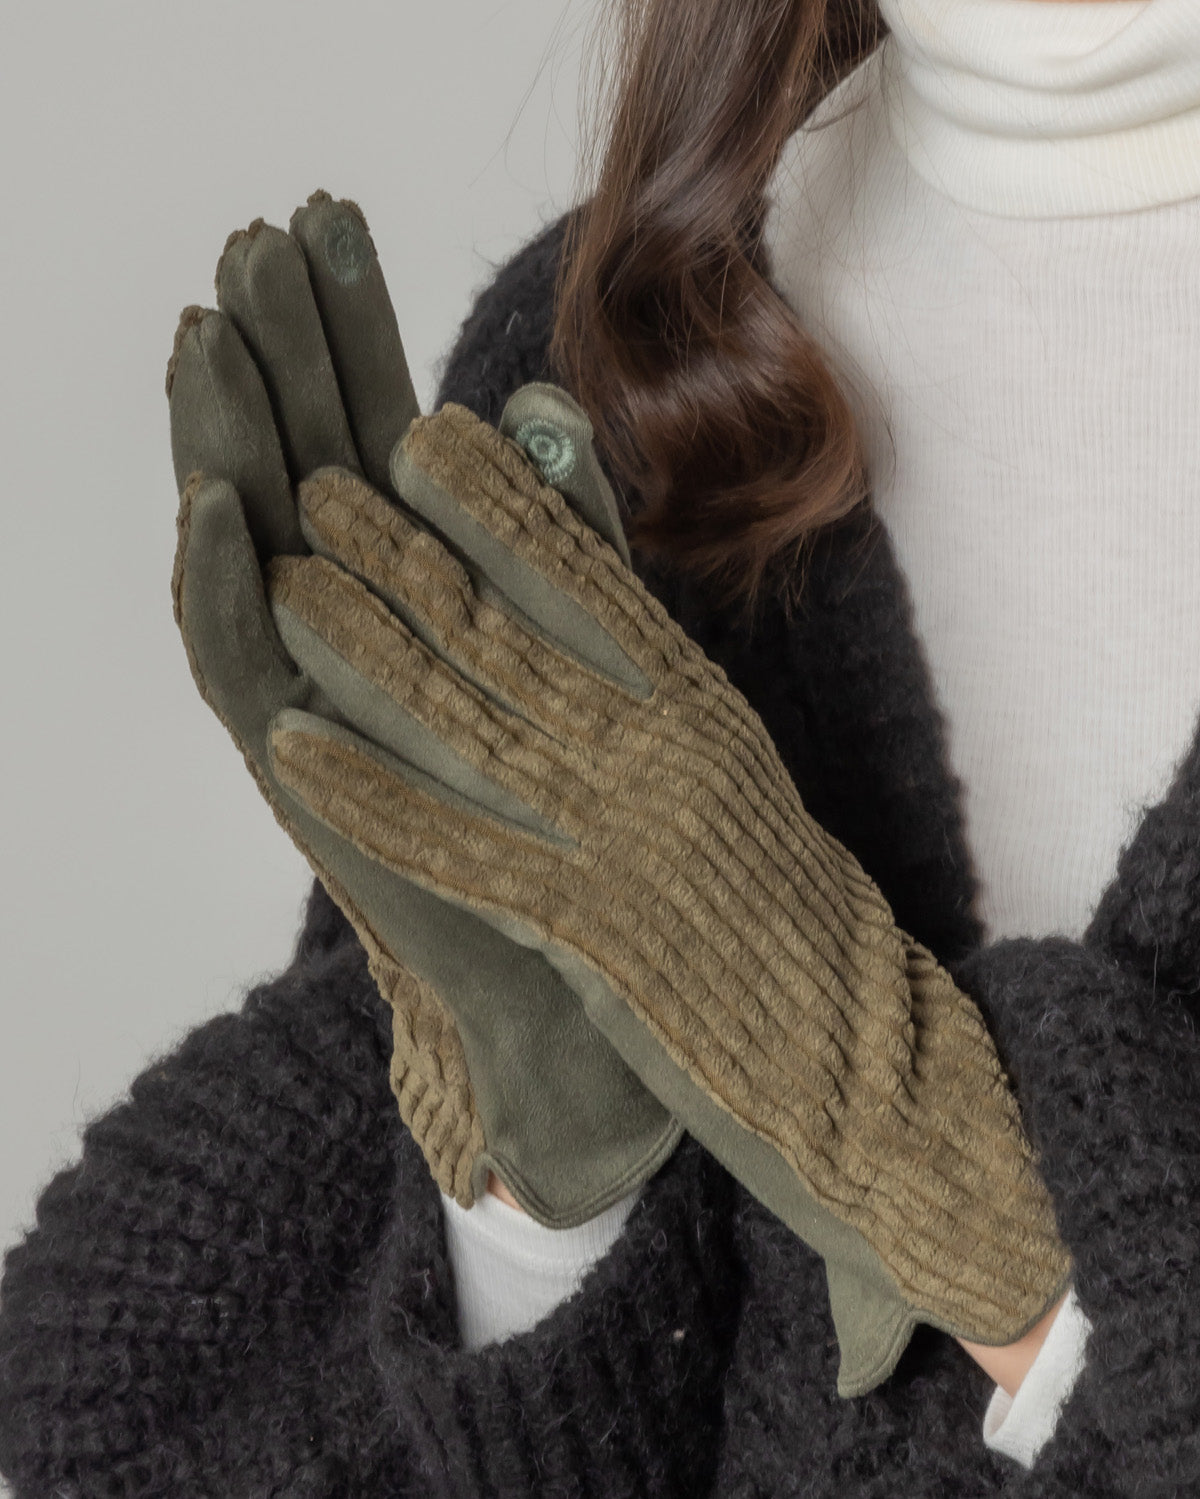 Shop for KW Fashion Fleece-Lined Corduroy And Suede Gloves at doeverythinginloveny.com wholesale fashion accessories